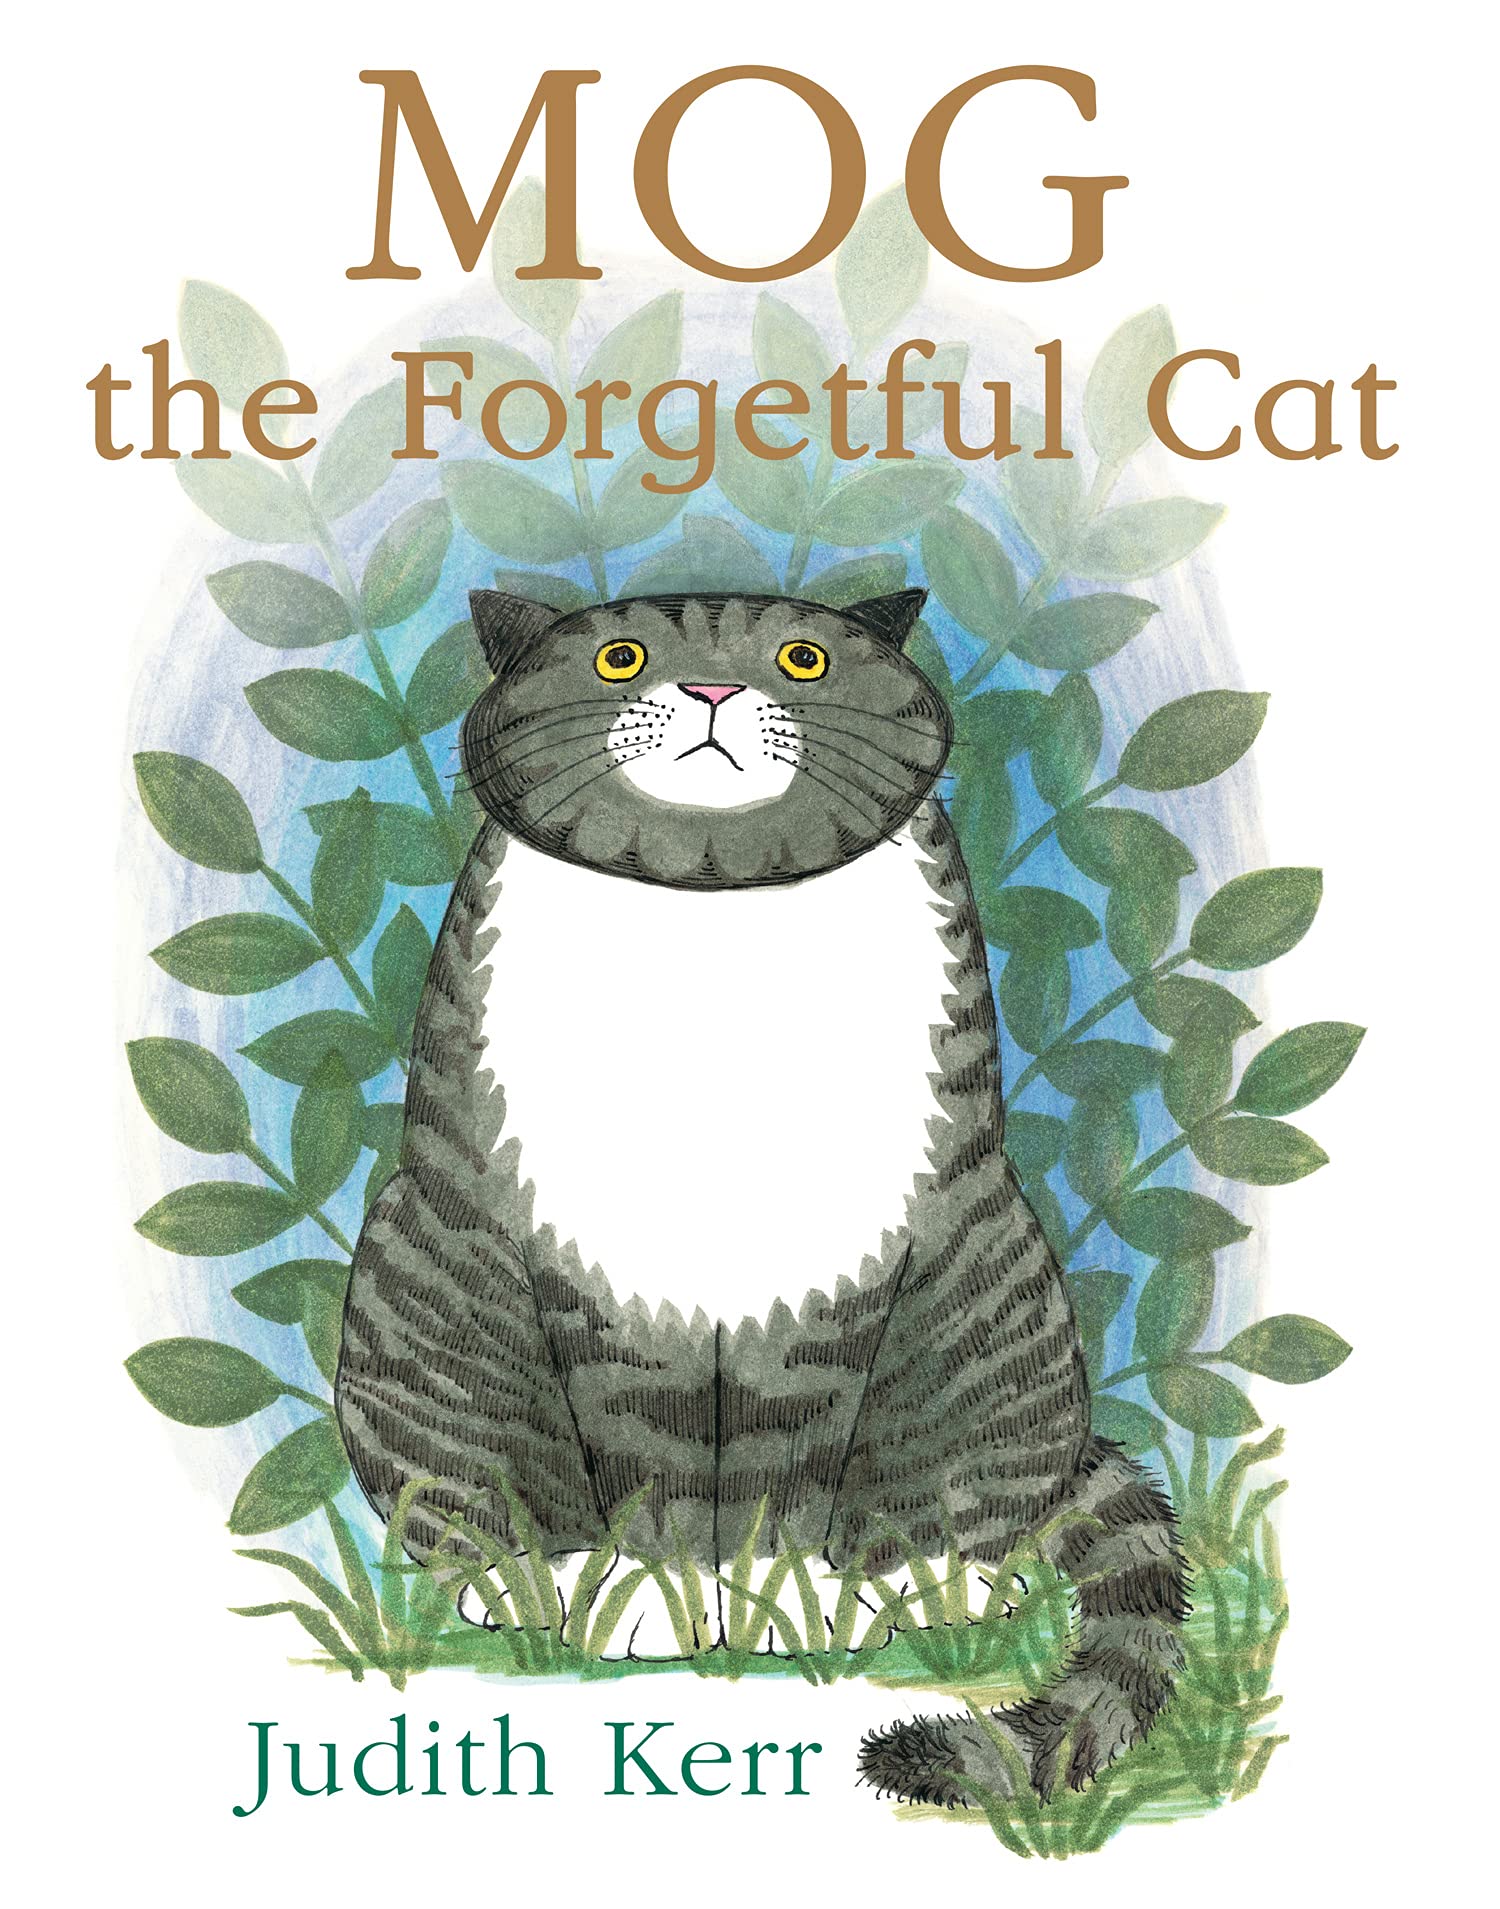 IMG : Mog the Forgetful Cat